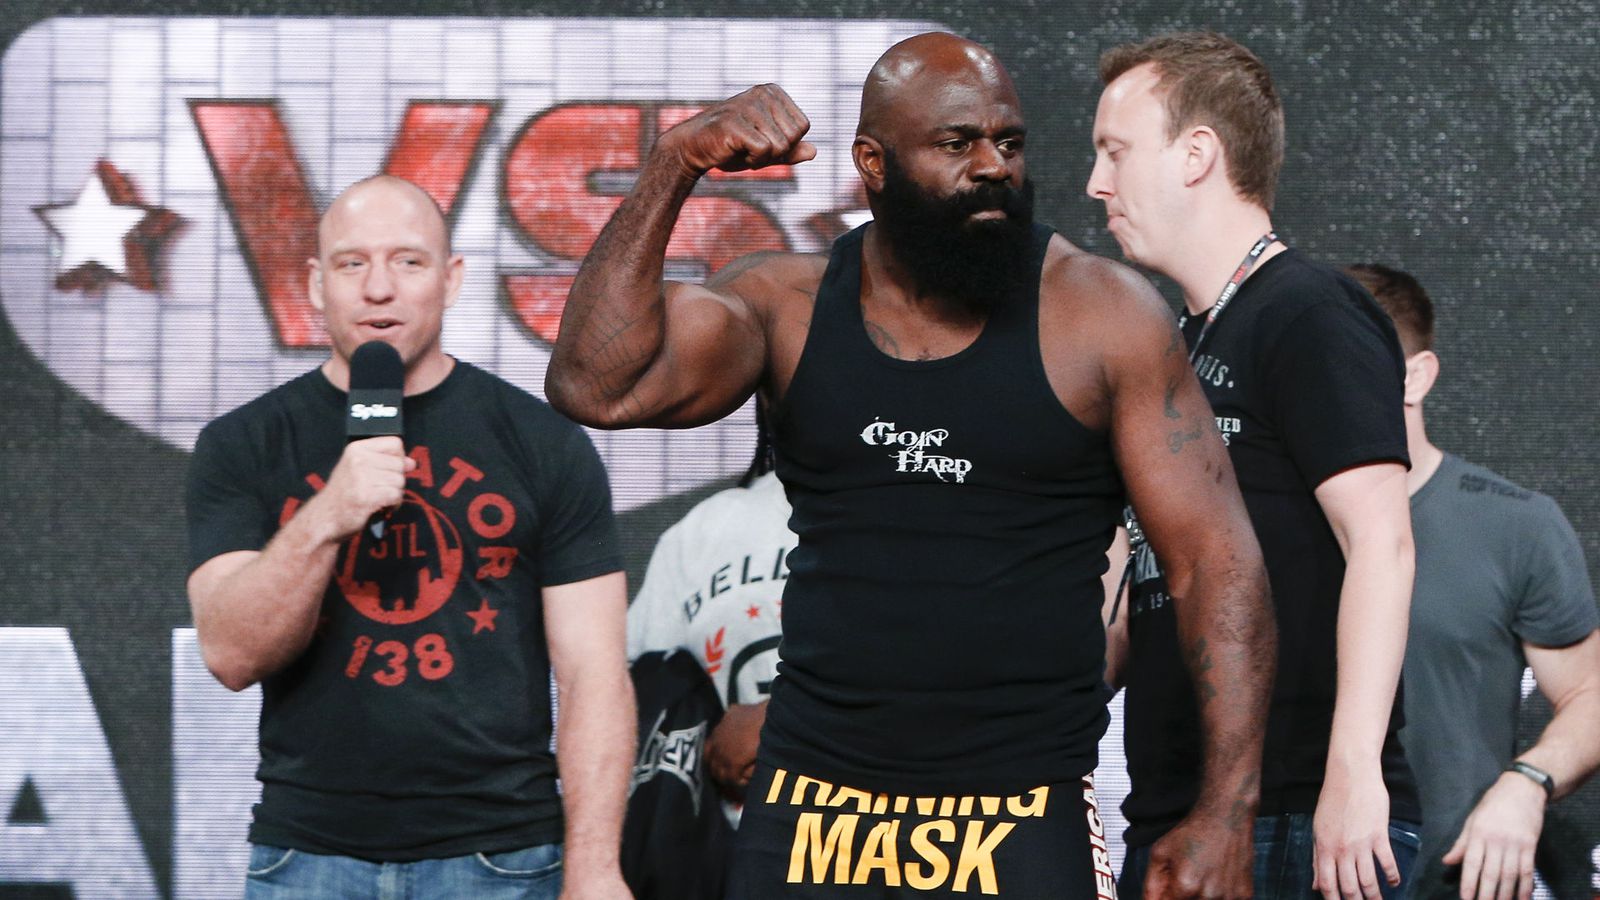 On Friday night, Ken Shamrock and Kimbo Slice will finally throw down in th...